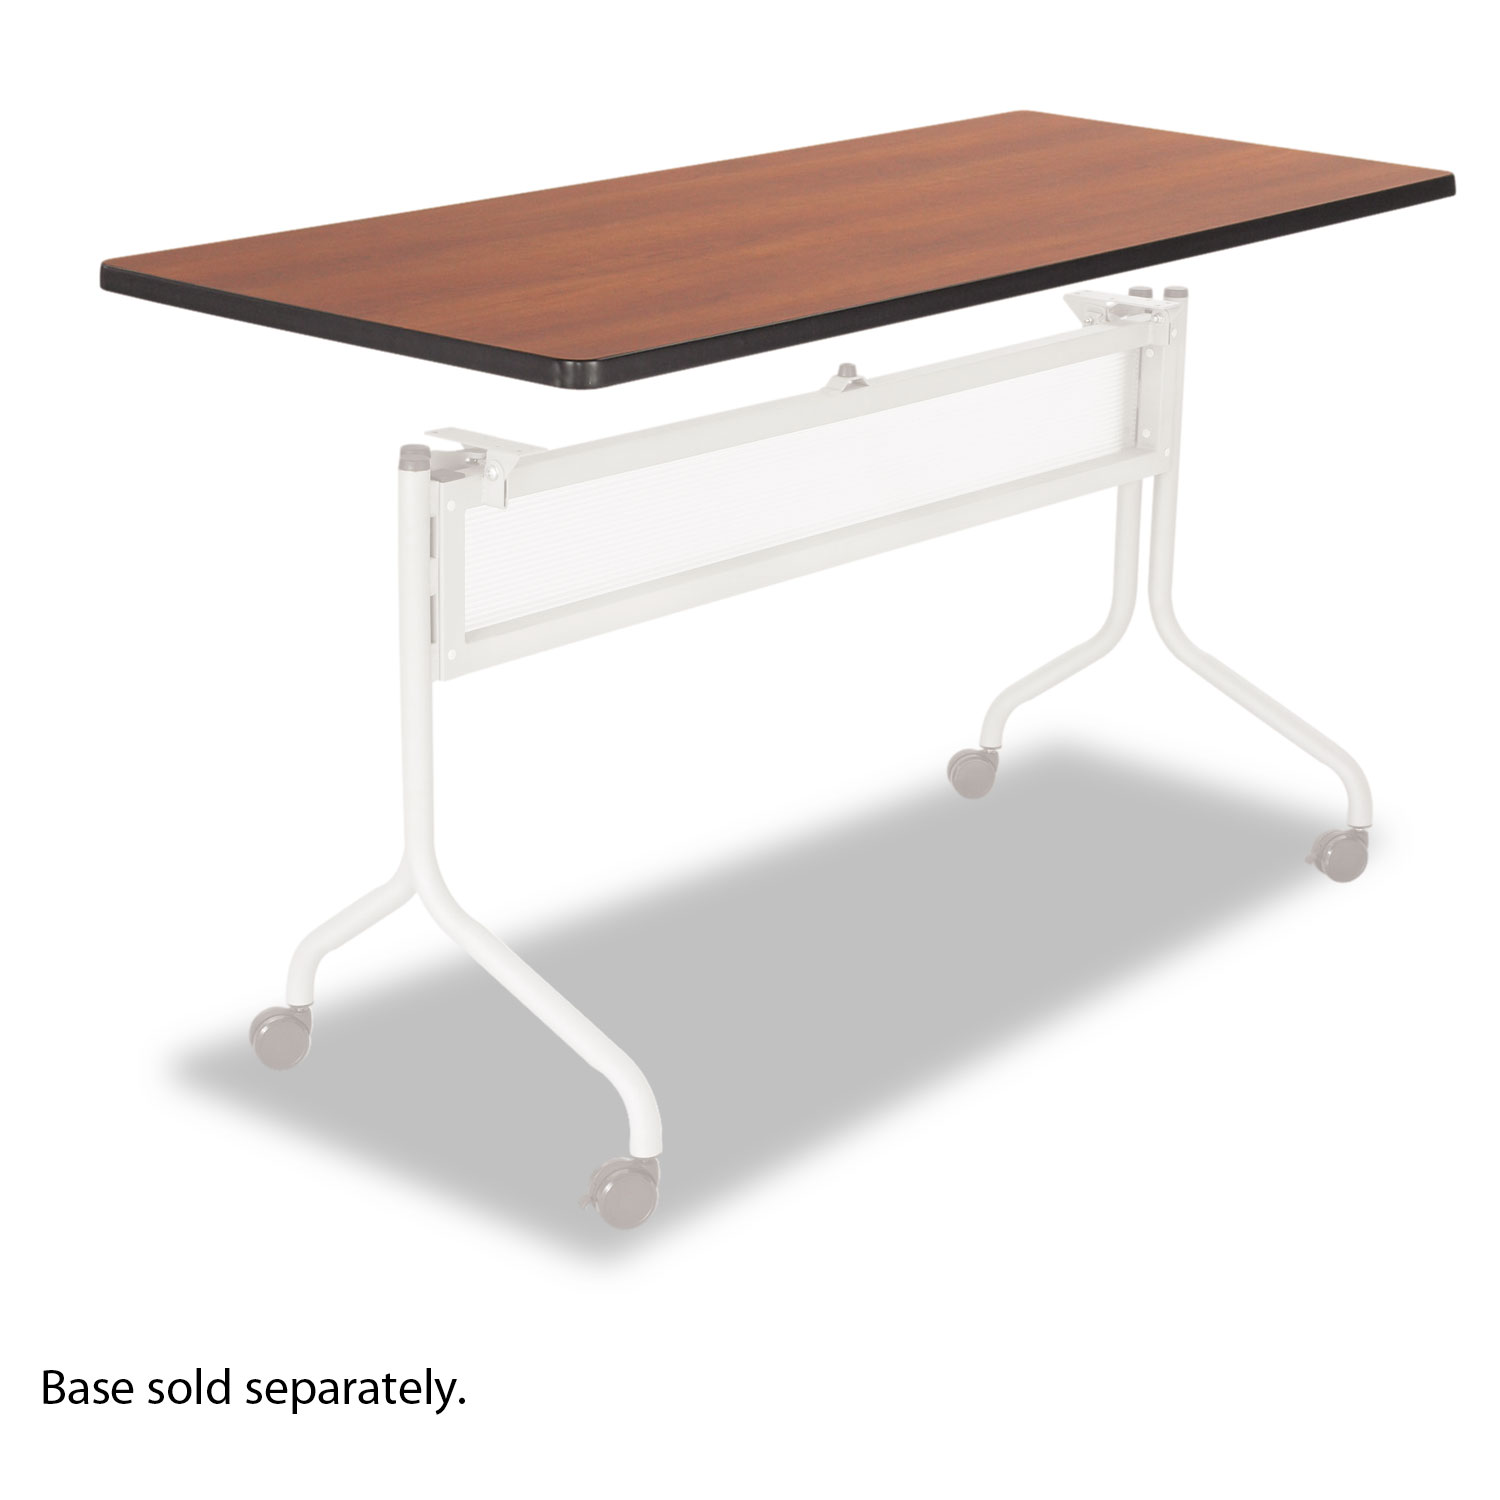 Safco SAF2066CY Impromptu Series Mobile Training Table Top, Rectangular, 60w x 24d, Cherry